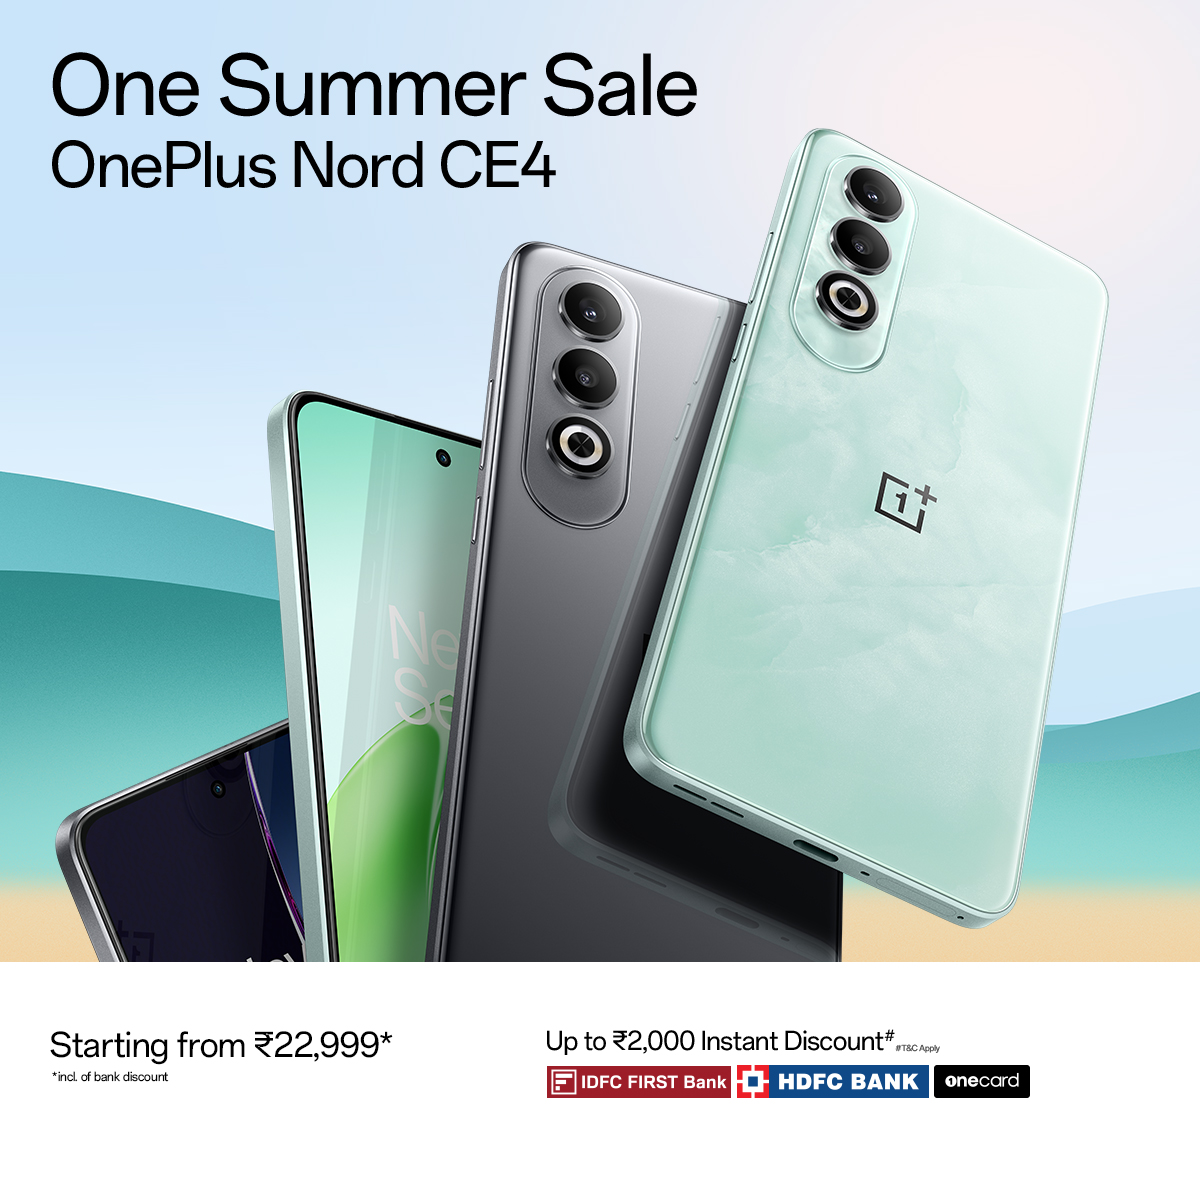 Splash out with amazing deal on OnePlus Nord CE4! Buy here> onepl.us/3xZh7M6 #onesummersale